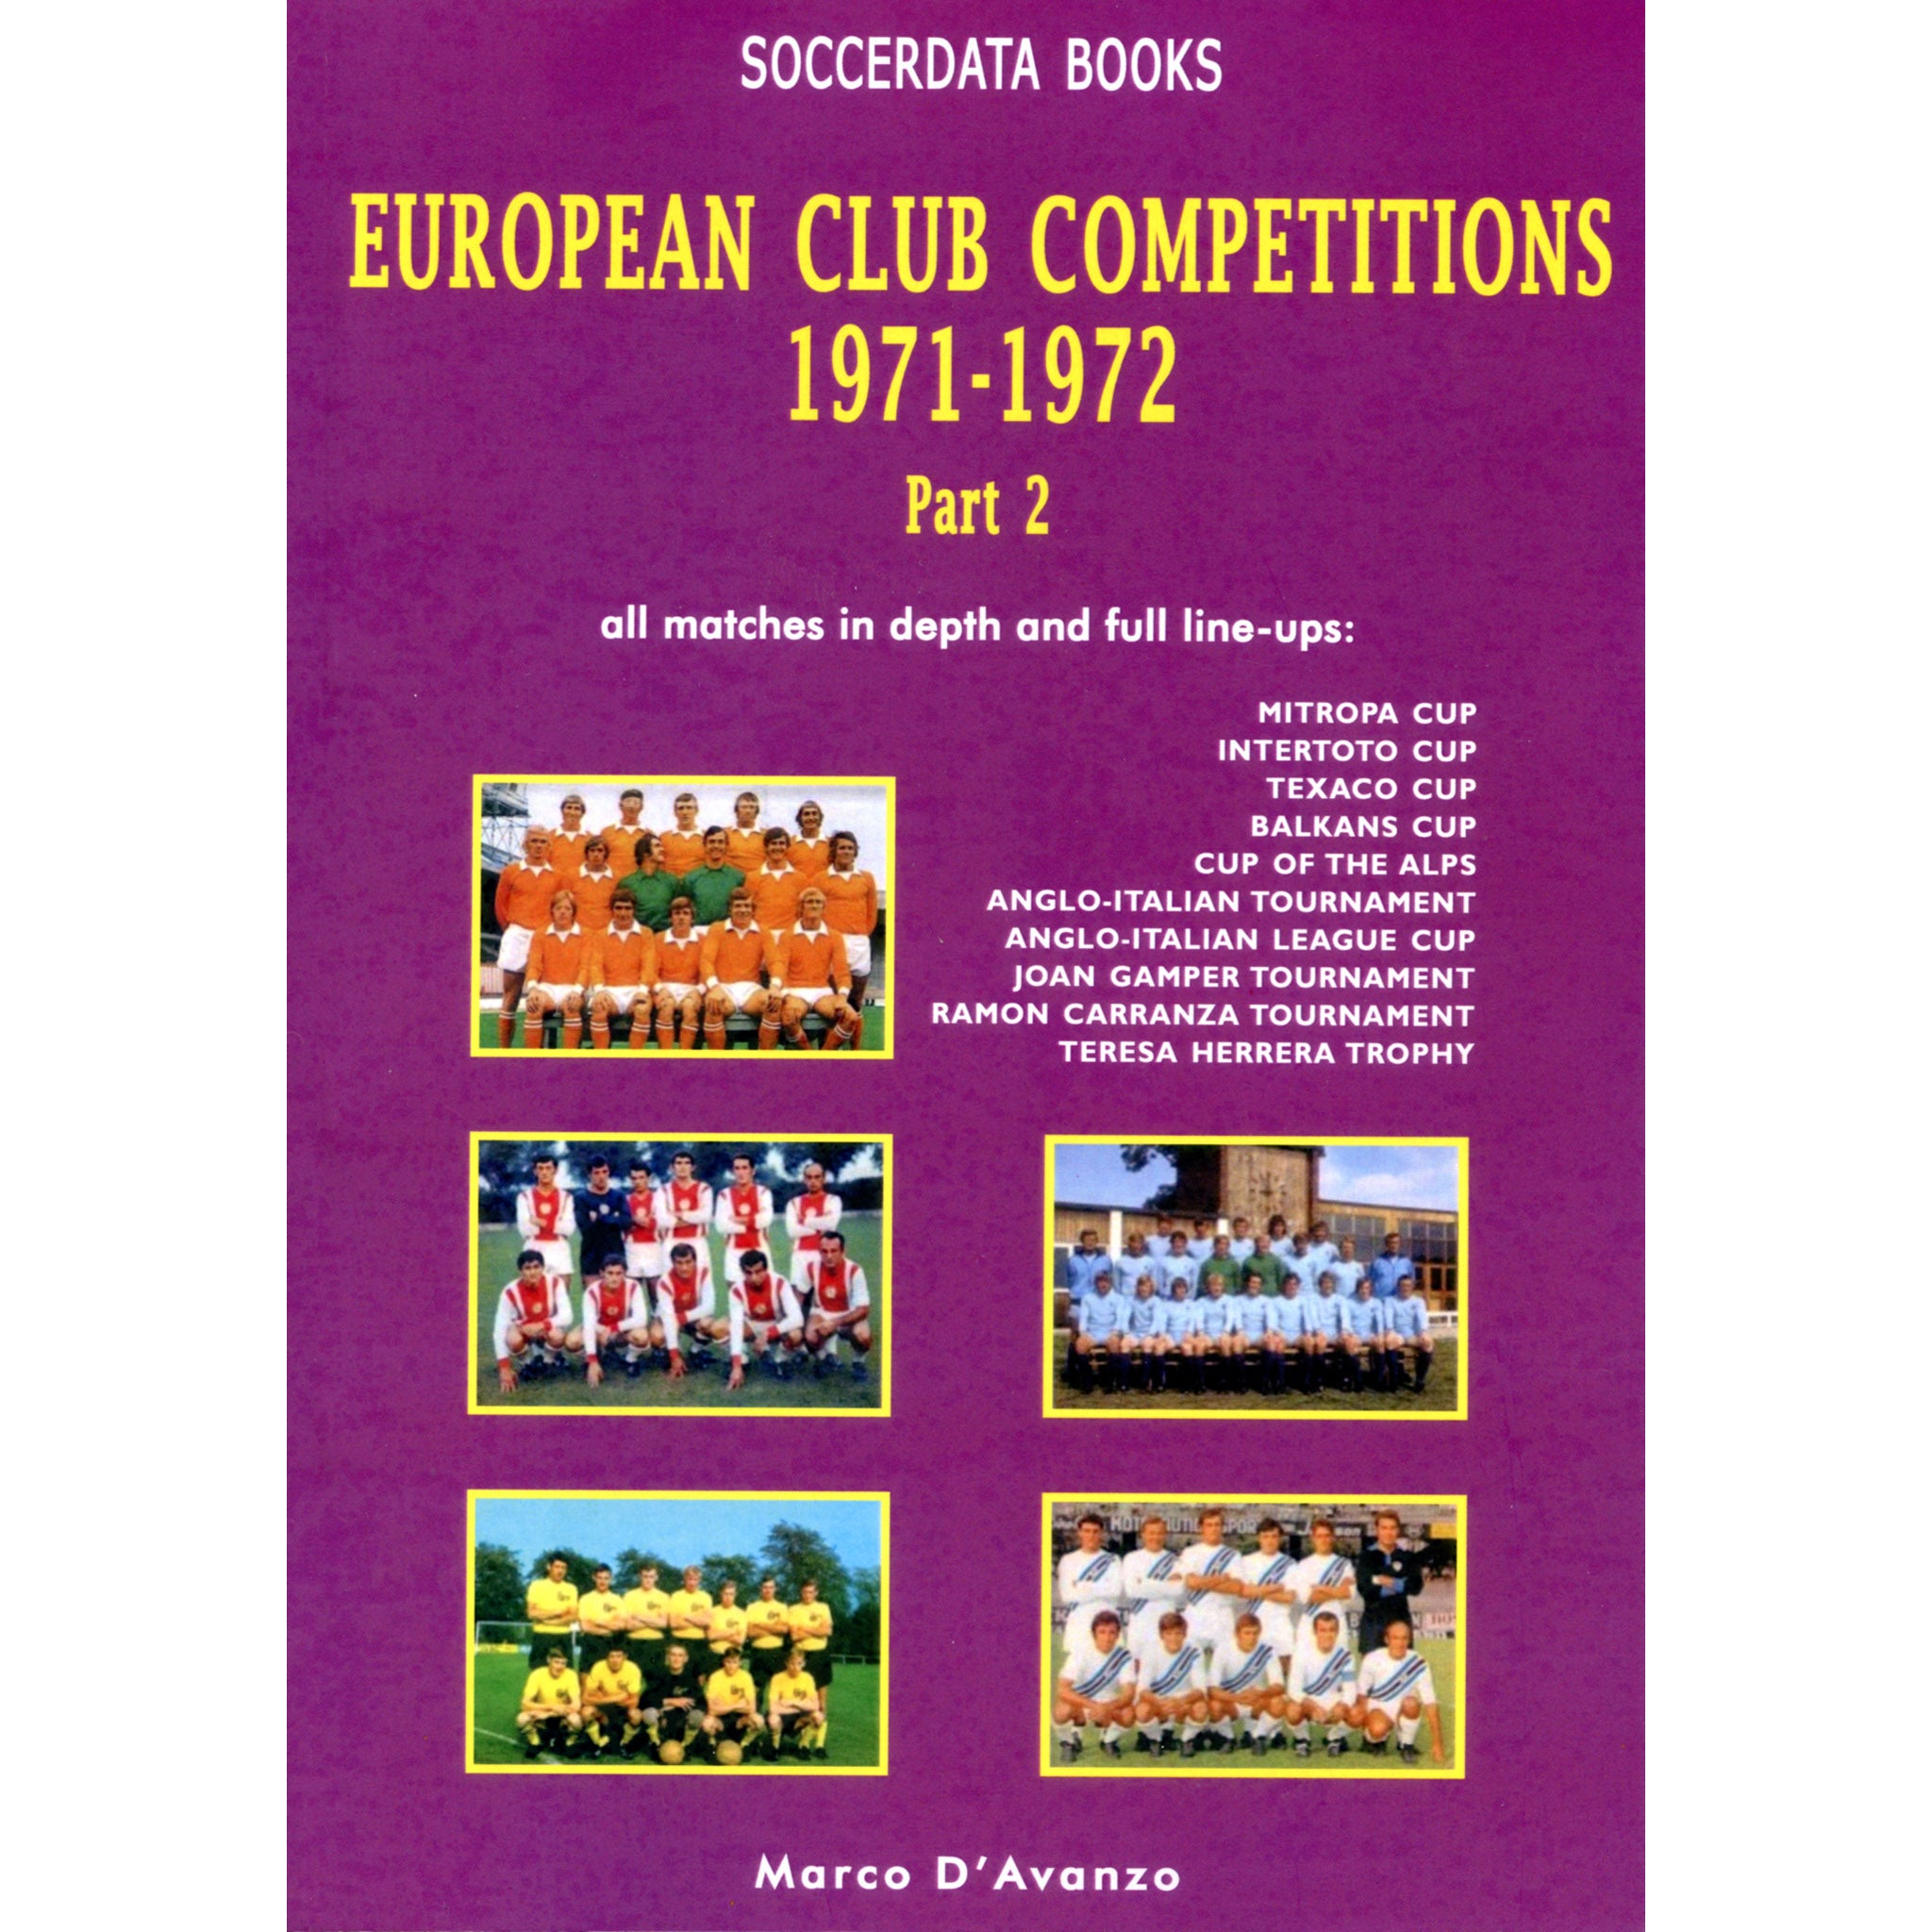 European Club Competitions 1971-1972 – Part 2